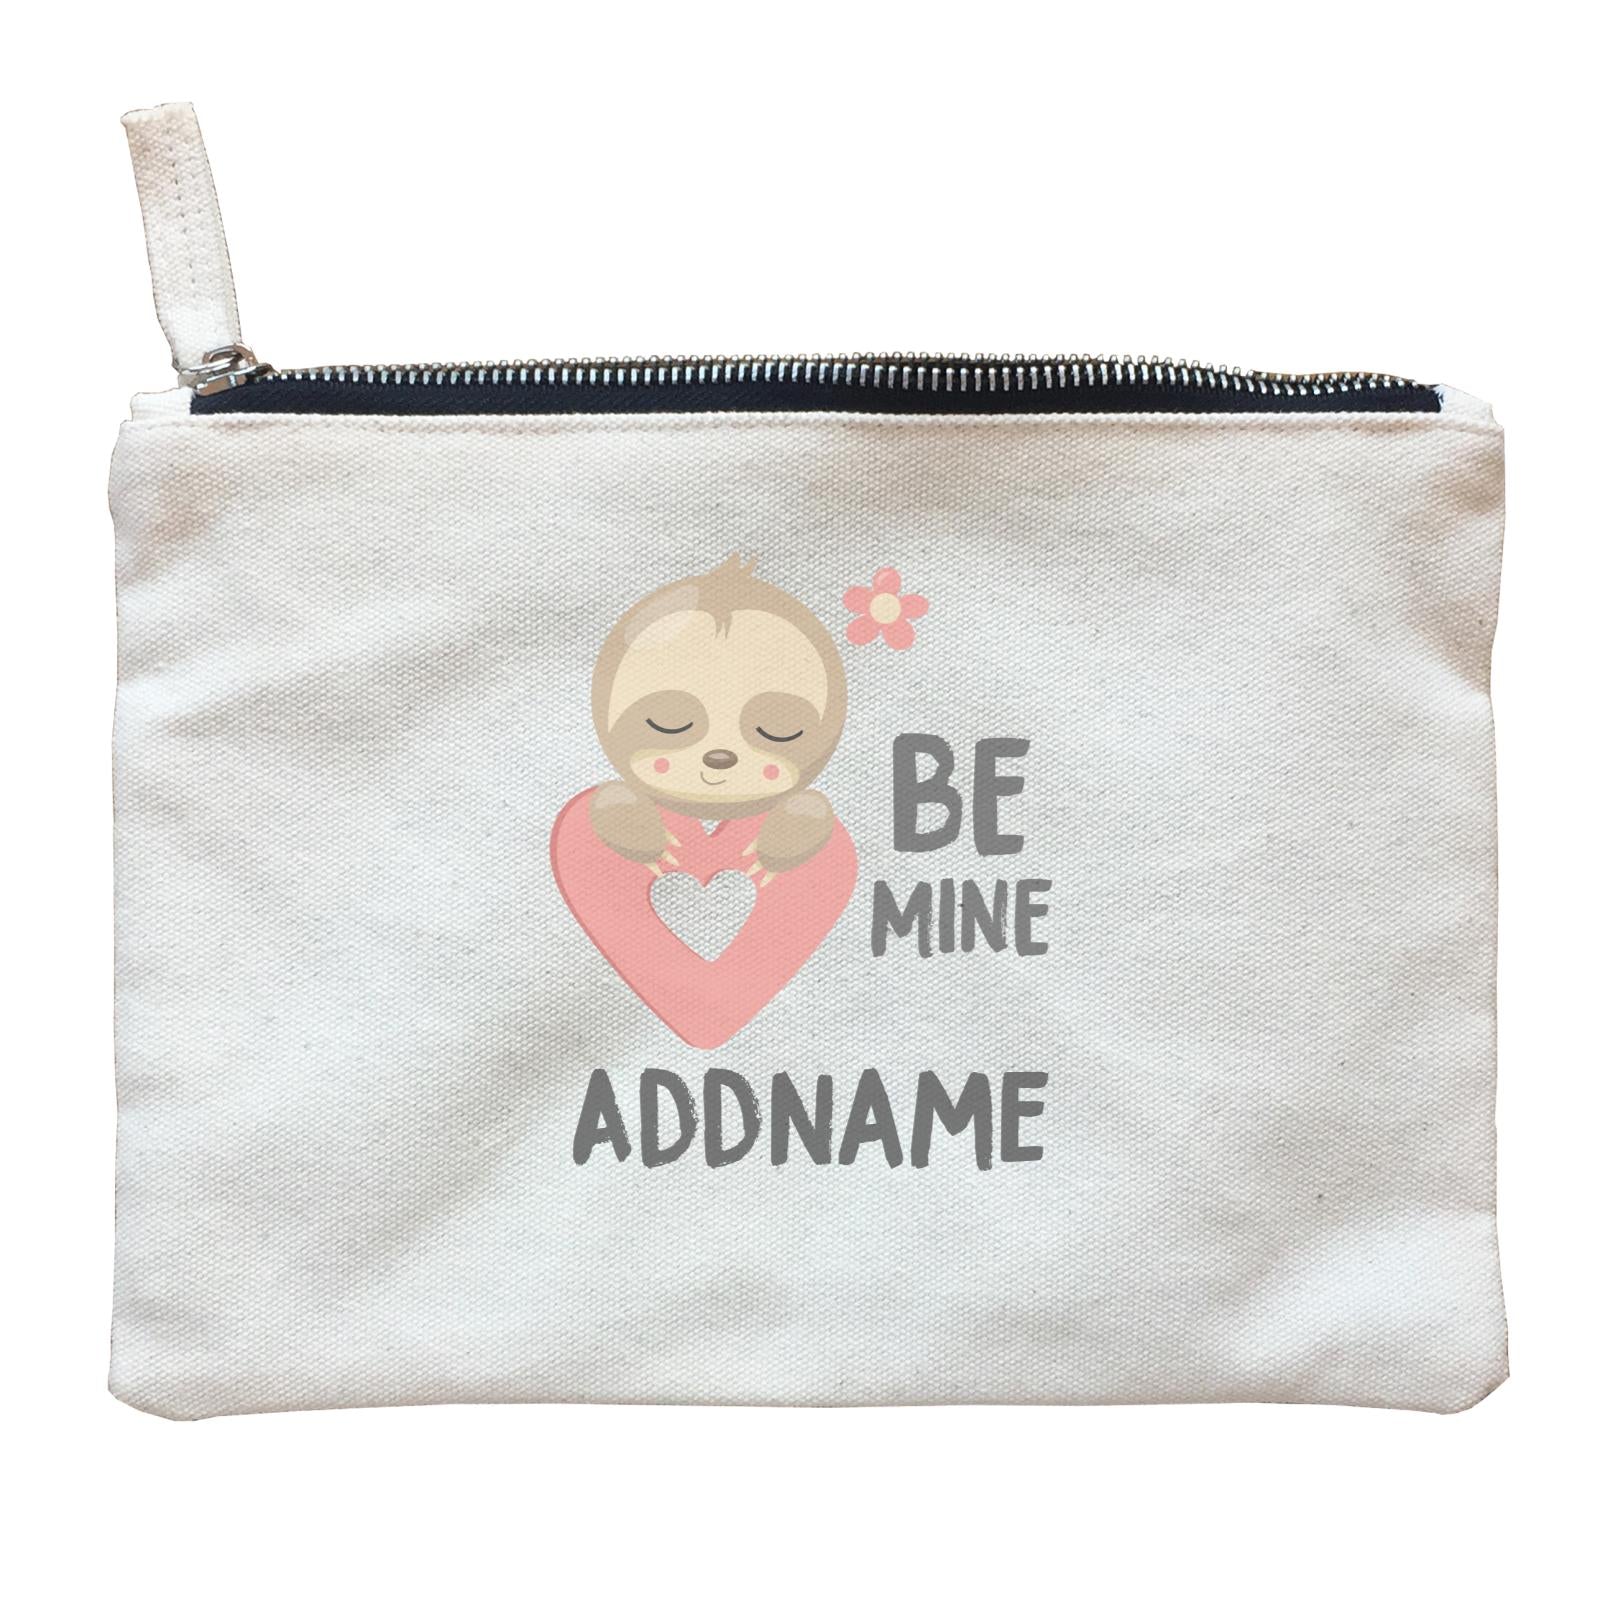 Cute Sloth Be Mine with Heart Addname Zipper Pouch